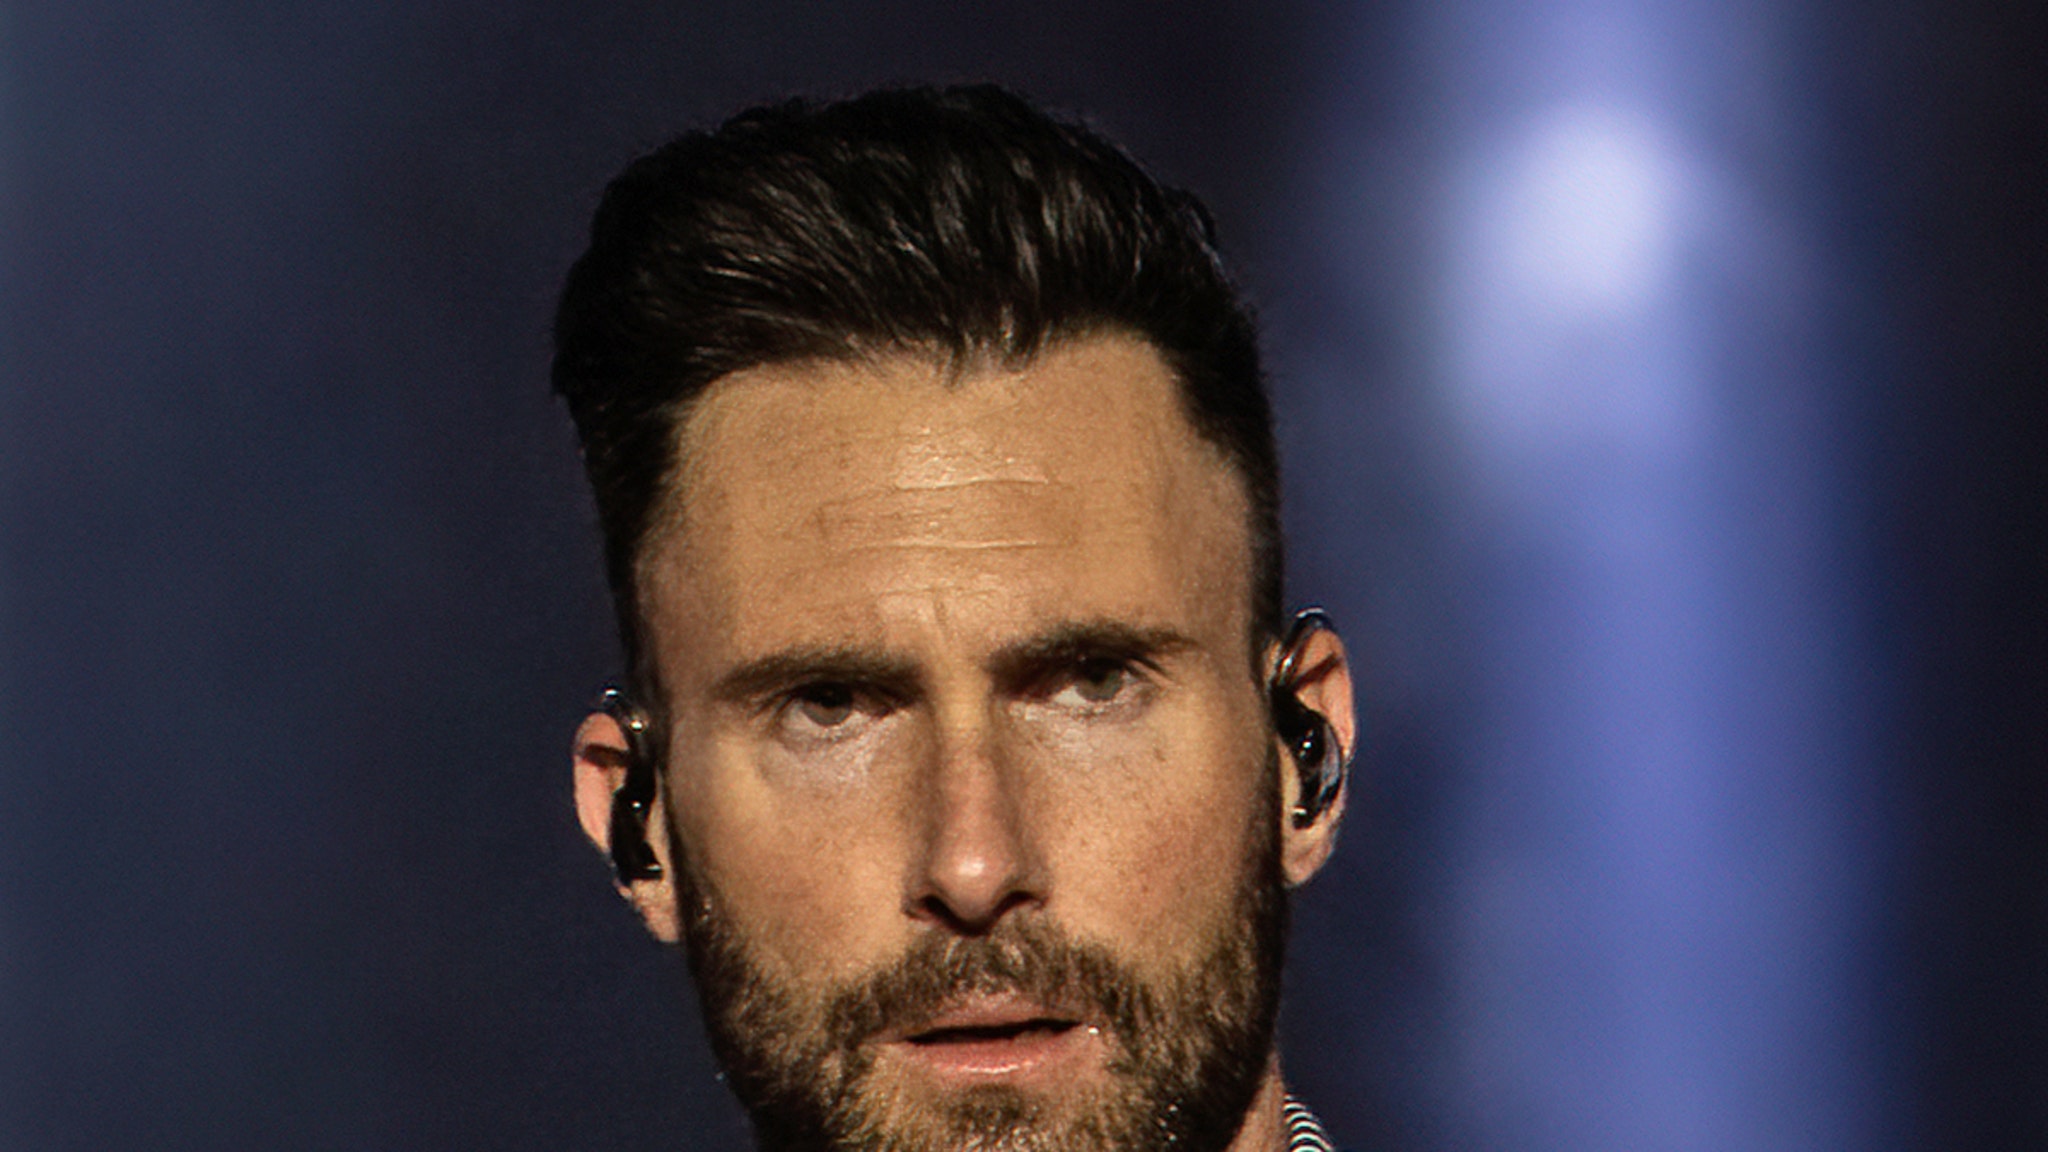 Adam Levine Accused of Sending Additional Women Flirty Messages